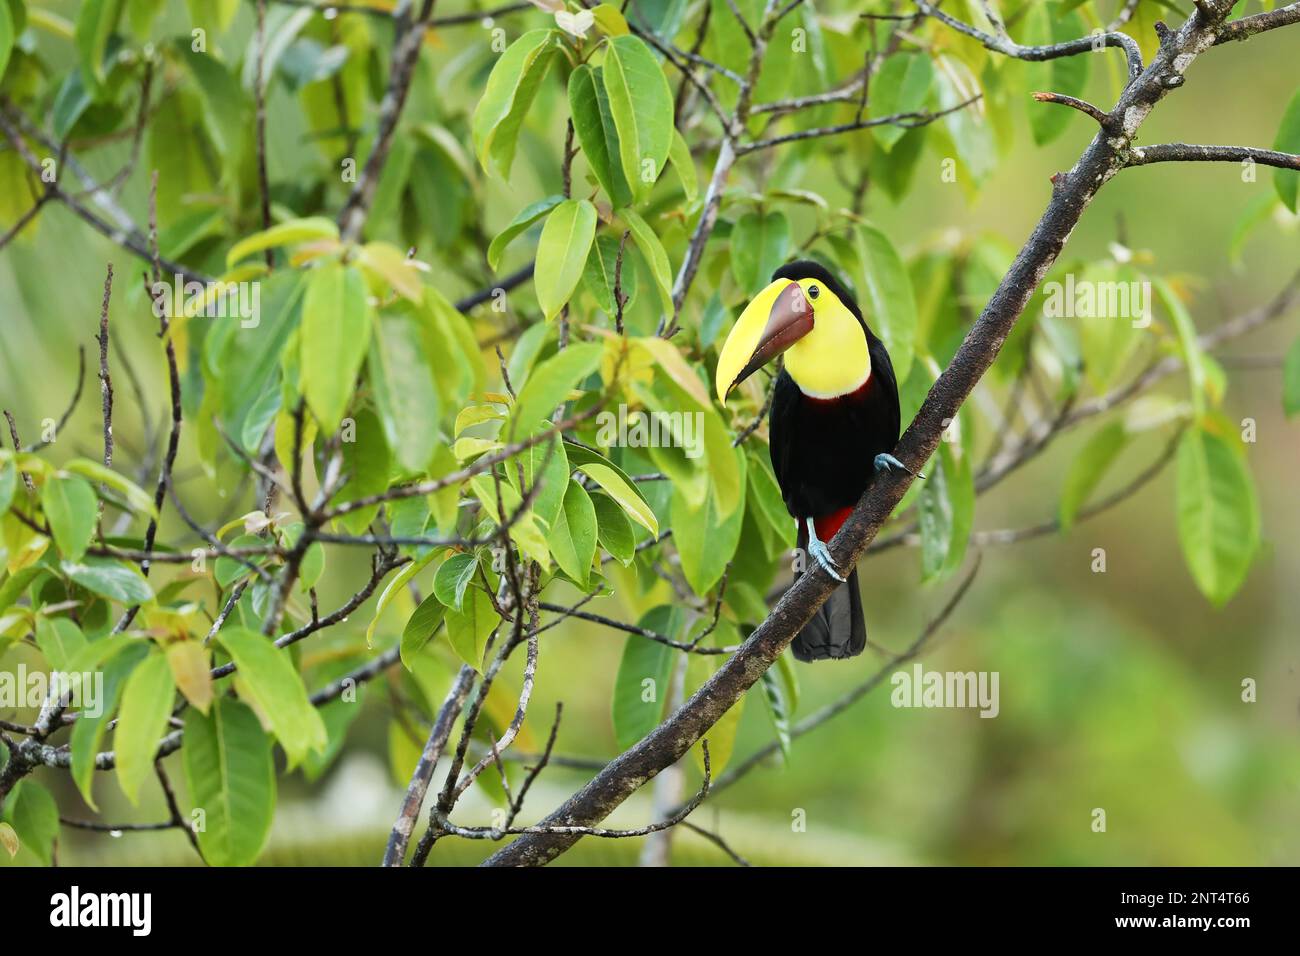 Yellow-throated Toucan in the Costa Rica nature. Chesnut-mandibled Toucan sitting on the branch in tropical rainforest. Bird in nature habitat Stock Photo